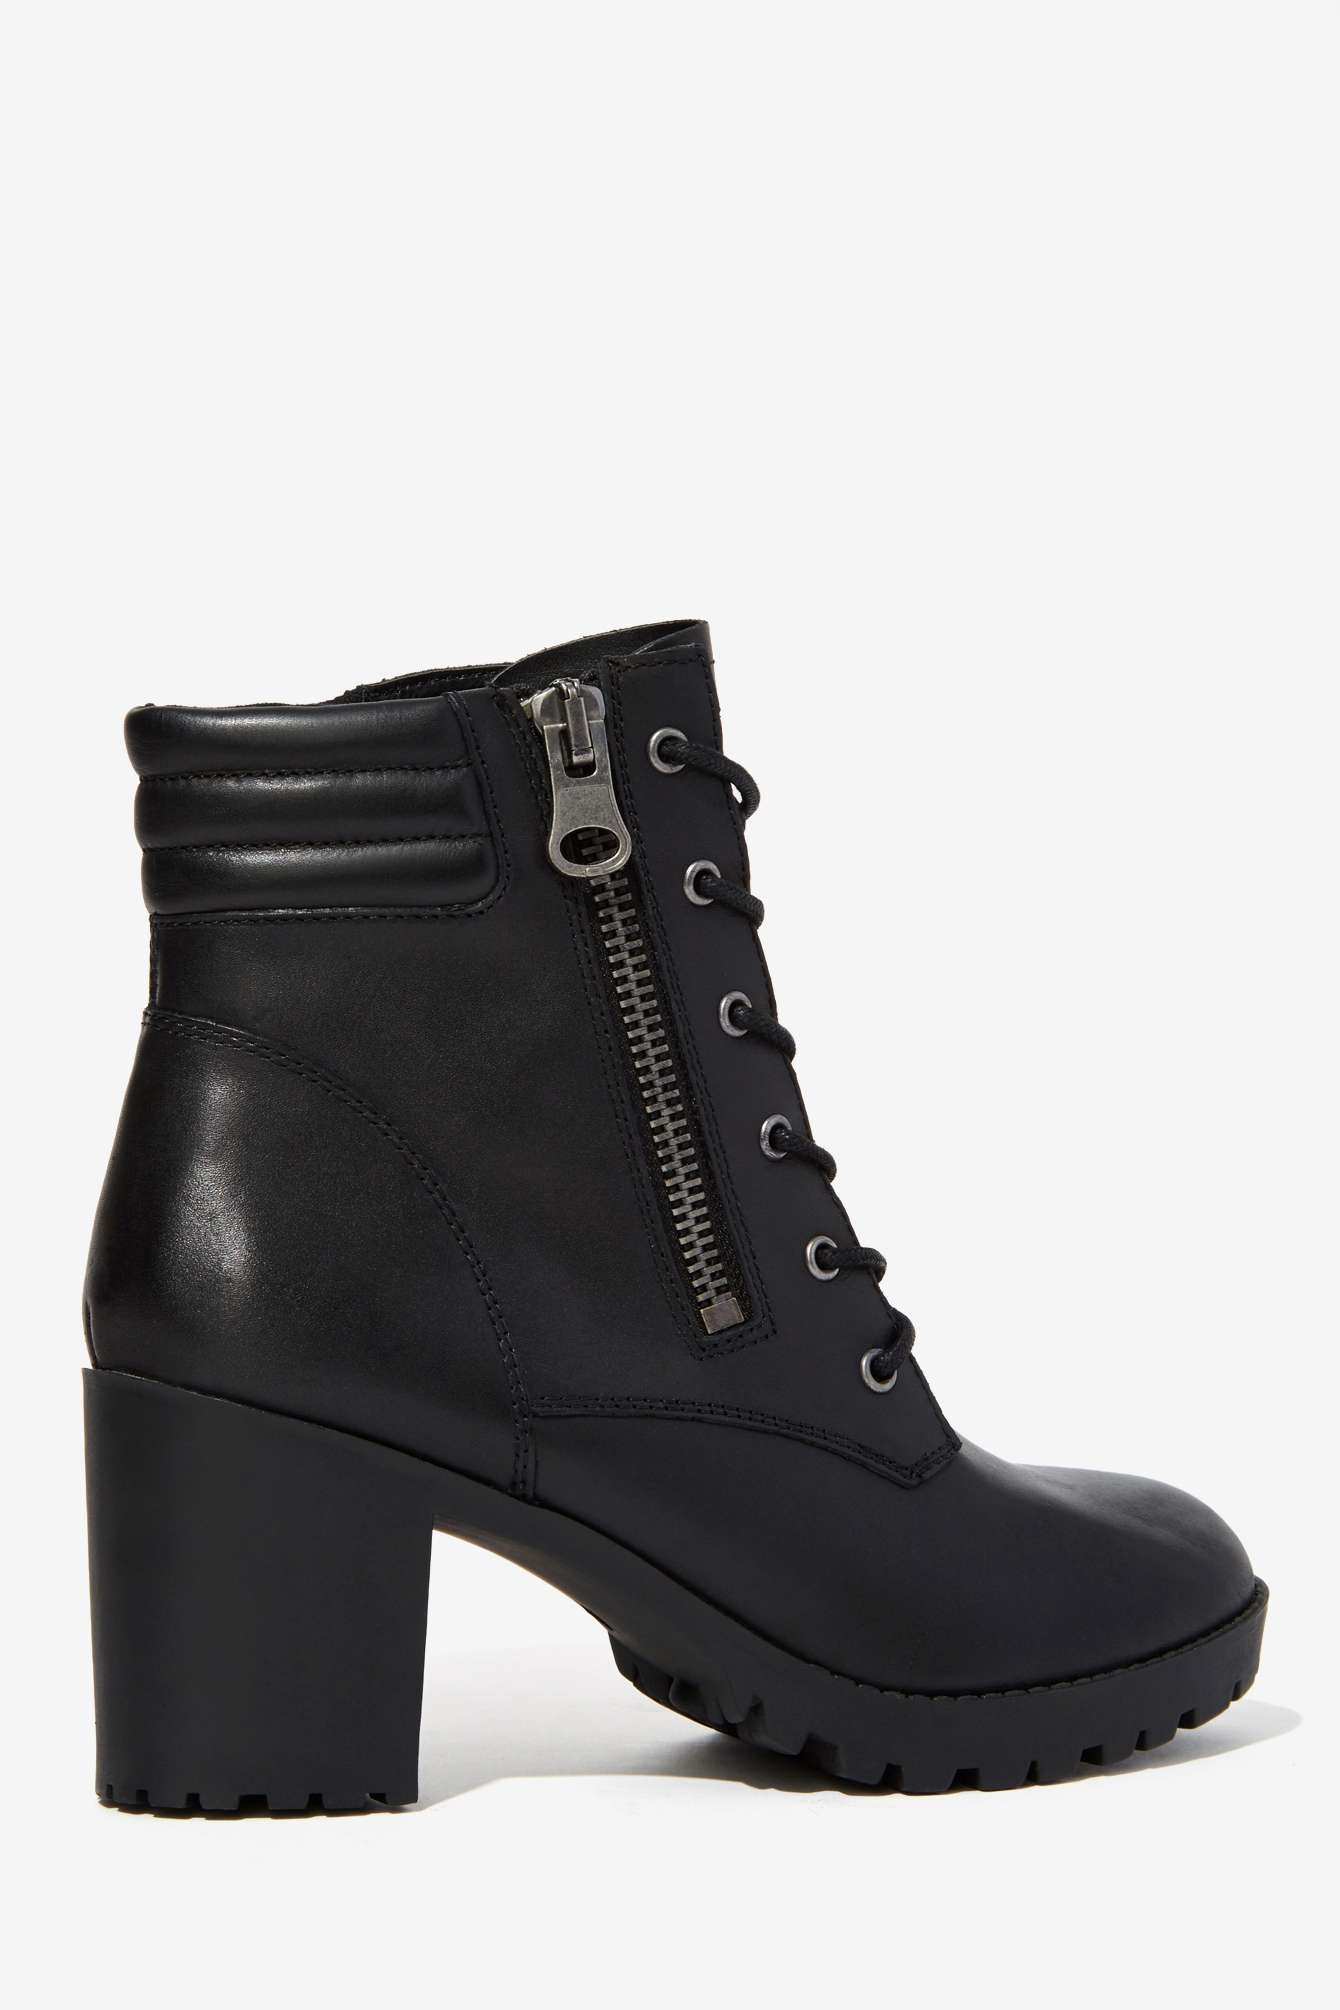 Discurso salado Menos Steve Madden Noodles Leather Boot in Black | Lyst